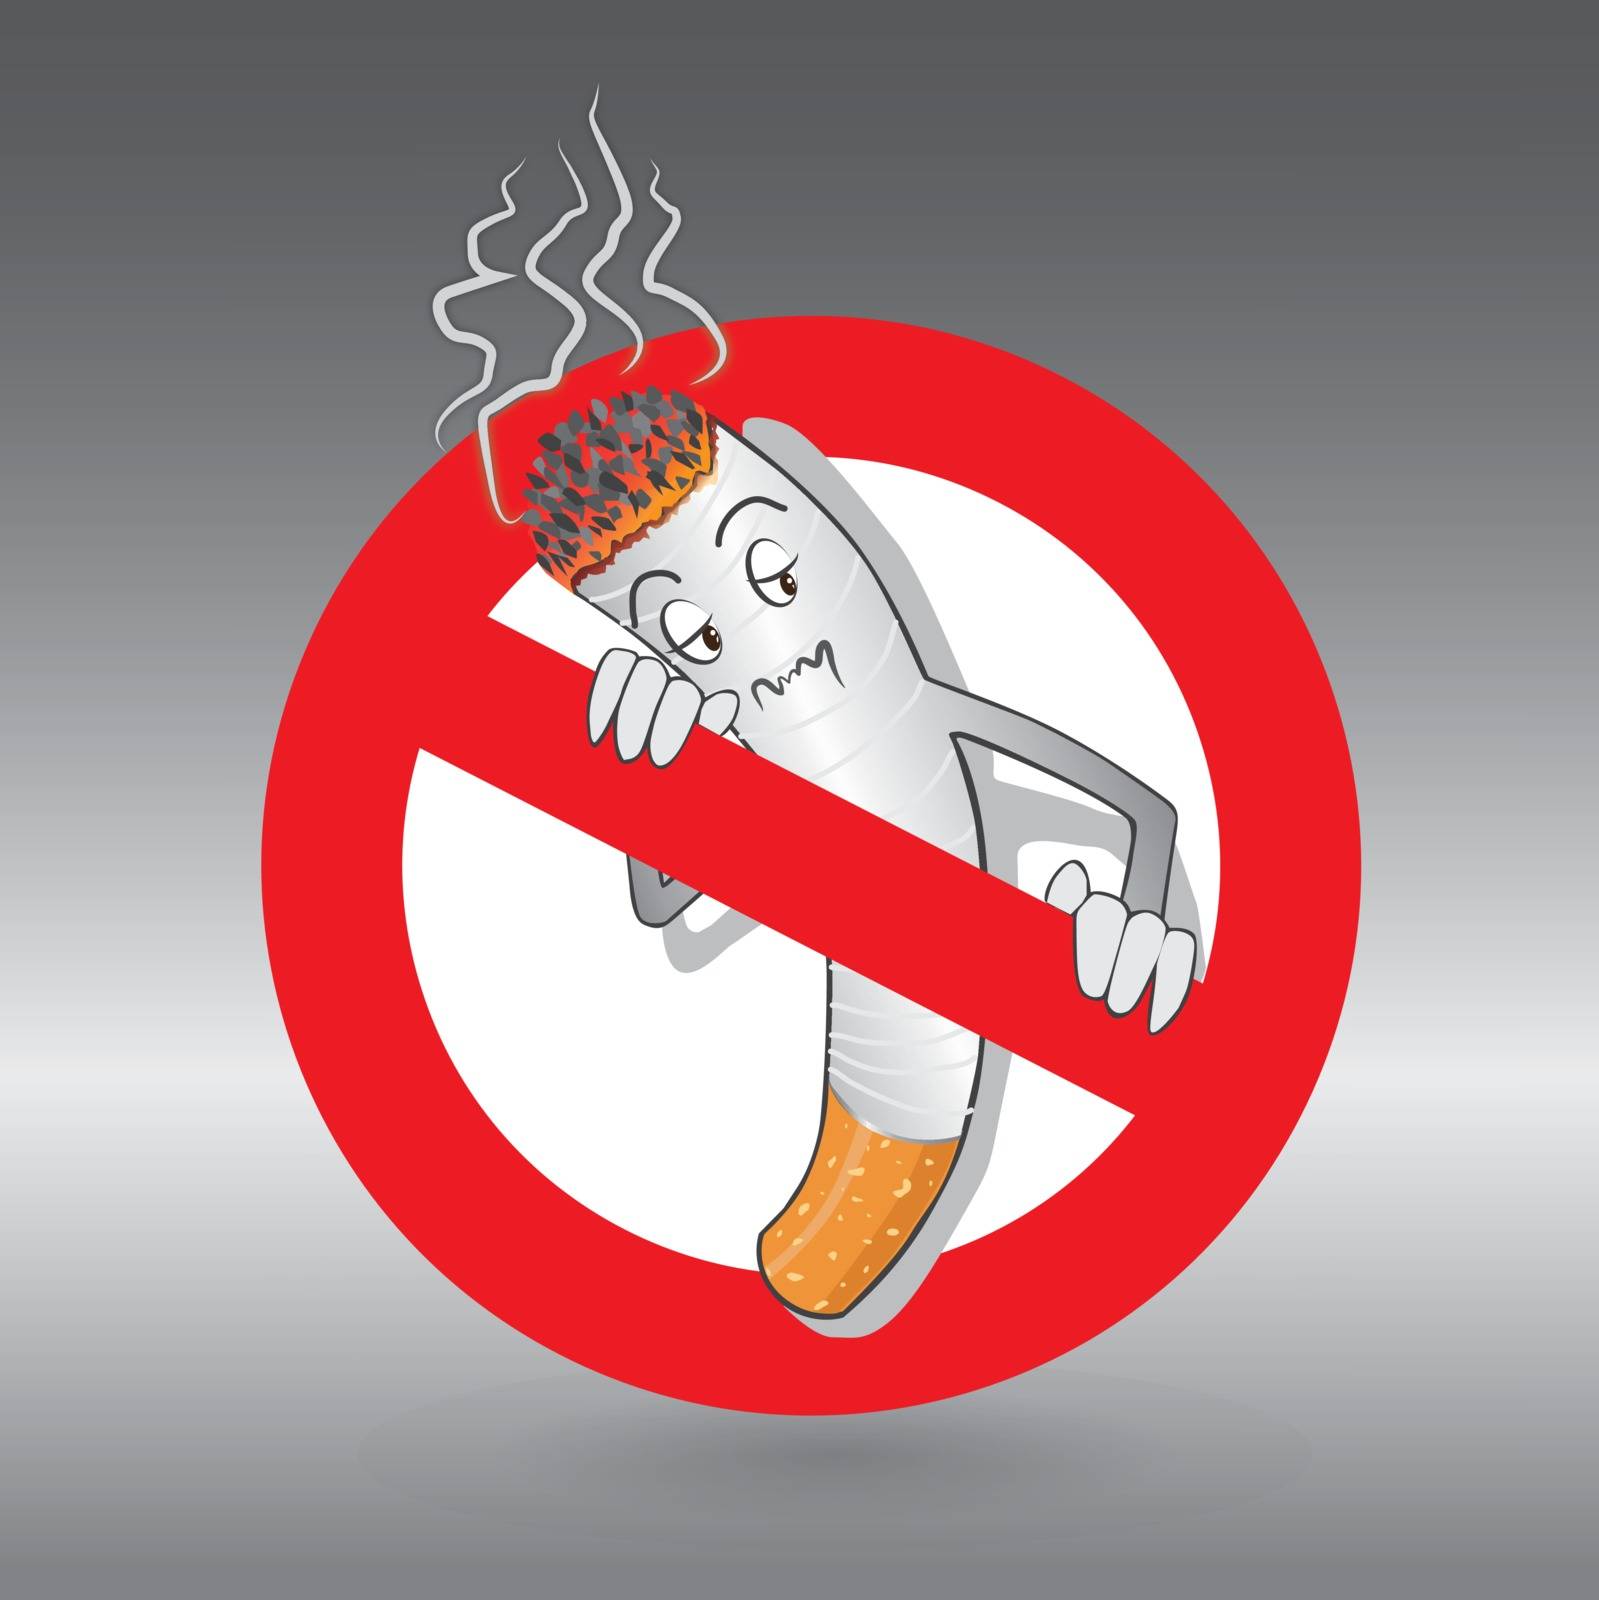 Stop smoking symbol for World No Tobacco Day in public places